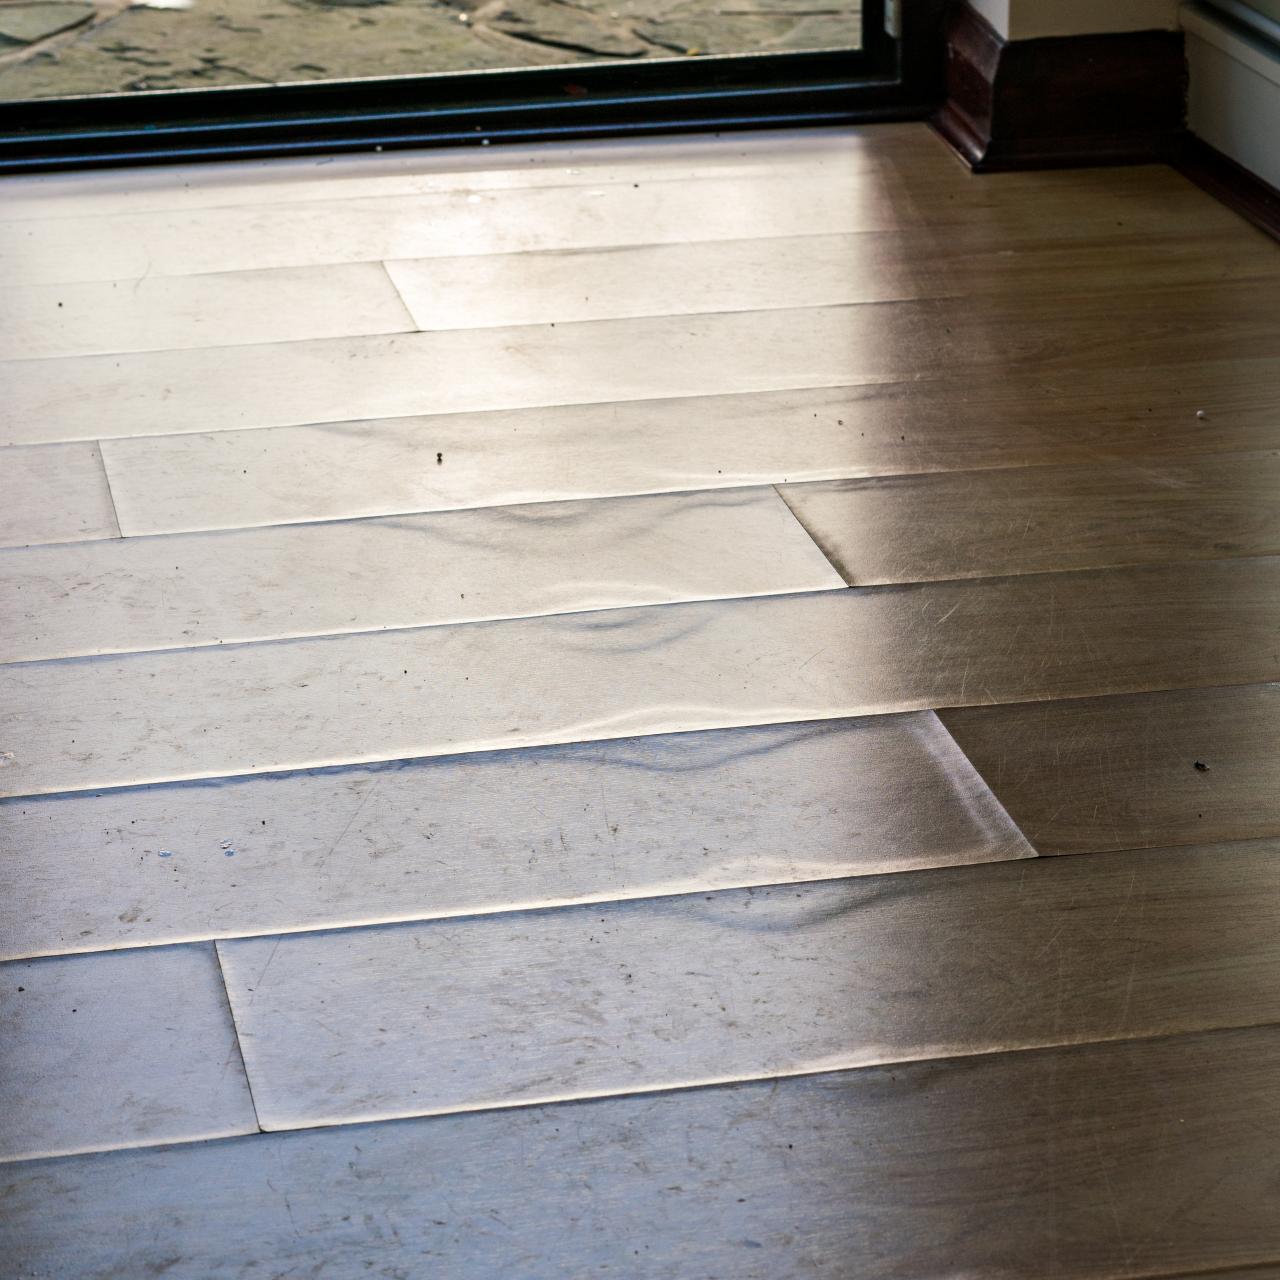 Cleaning Laminate Floors With Steam Mop, Can I Steam Clean Laminate Wood Floors